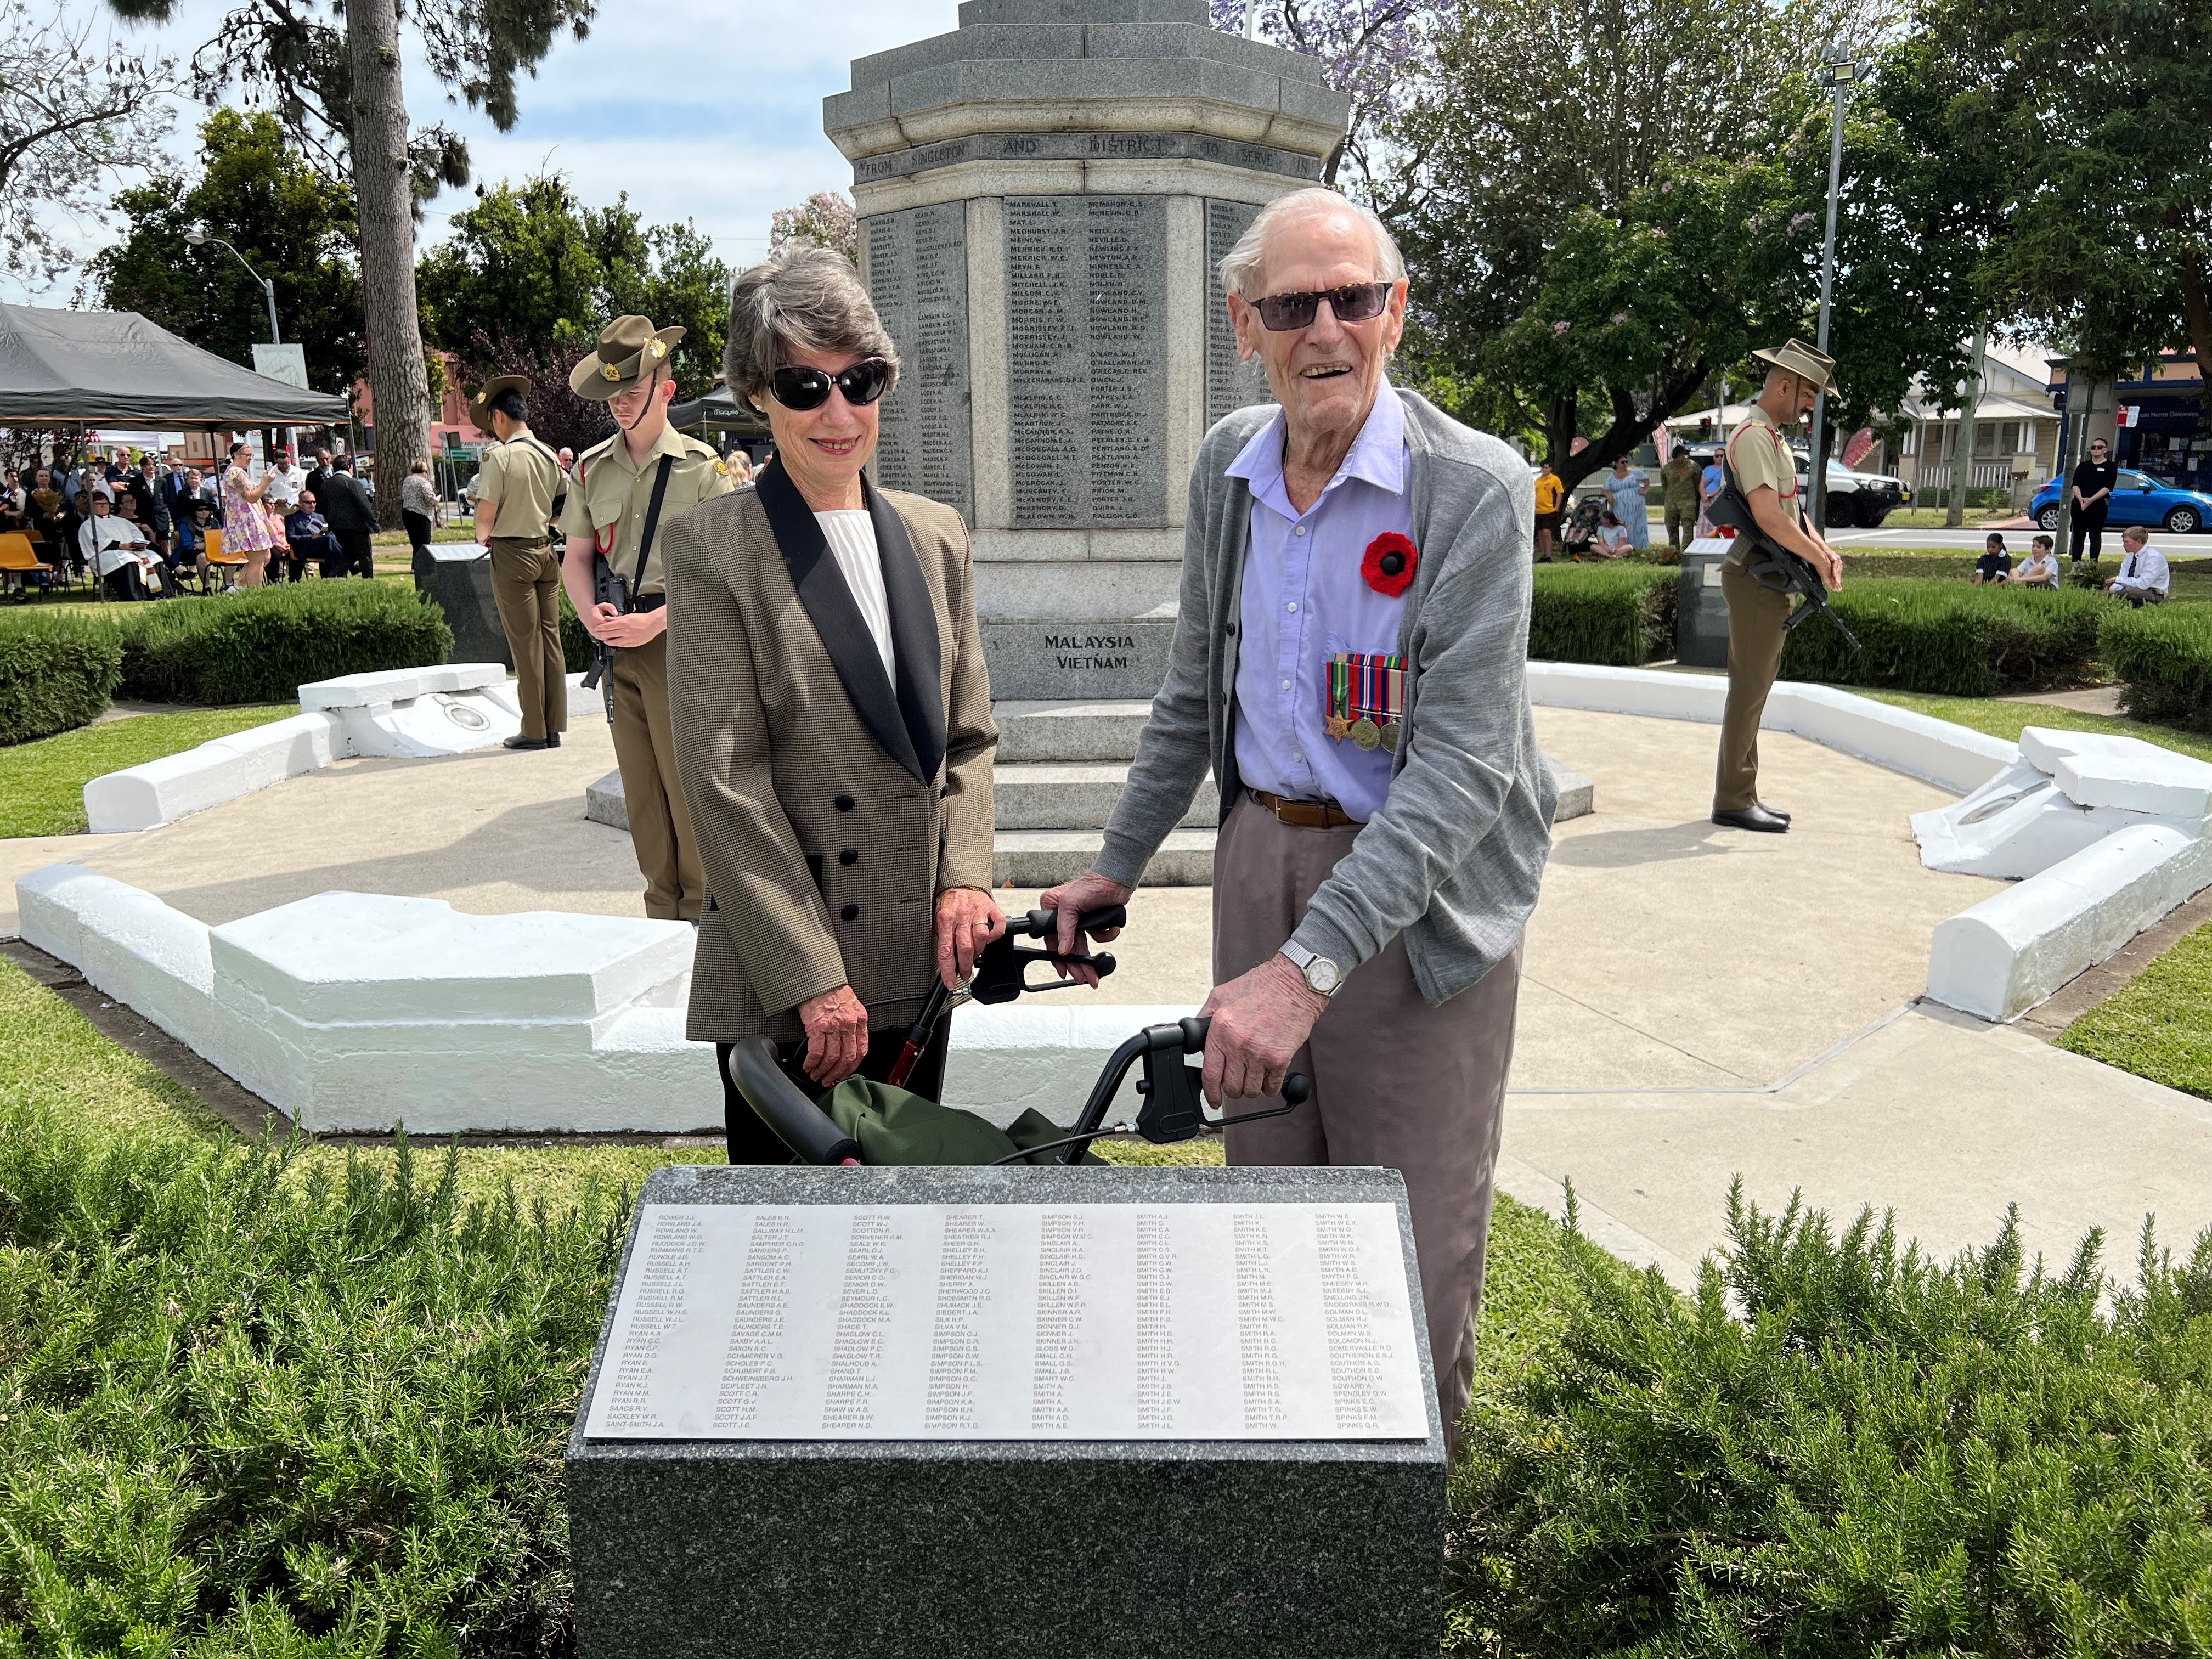 Finally, A Place for WWII Remembrance